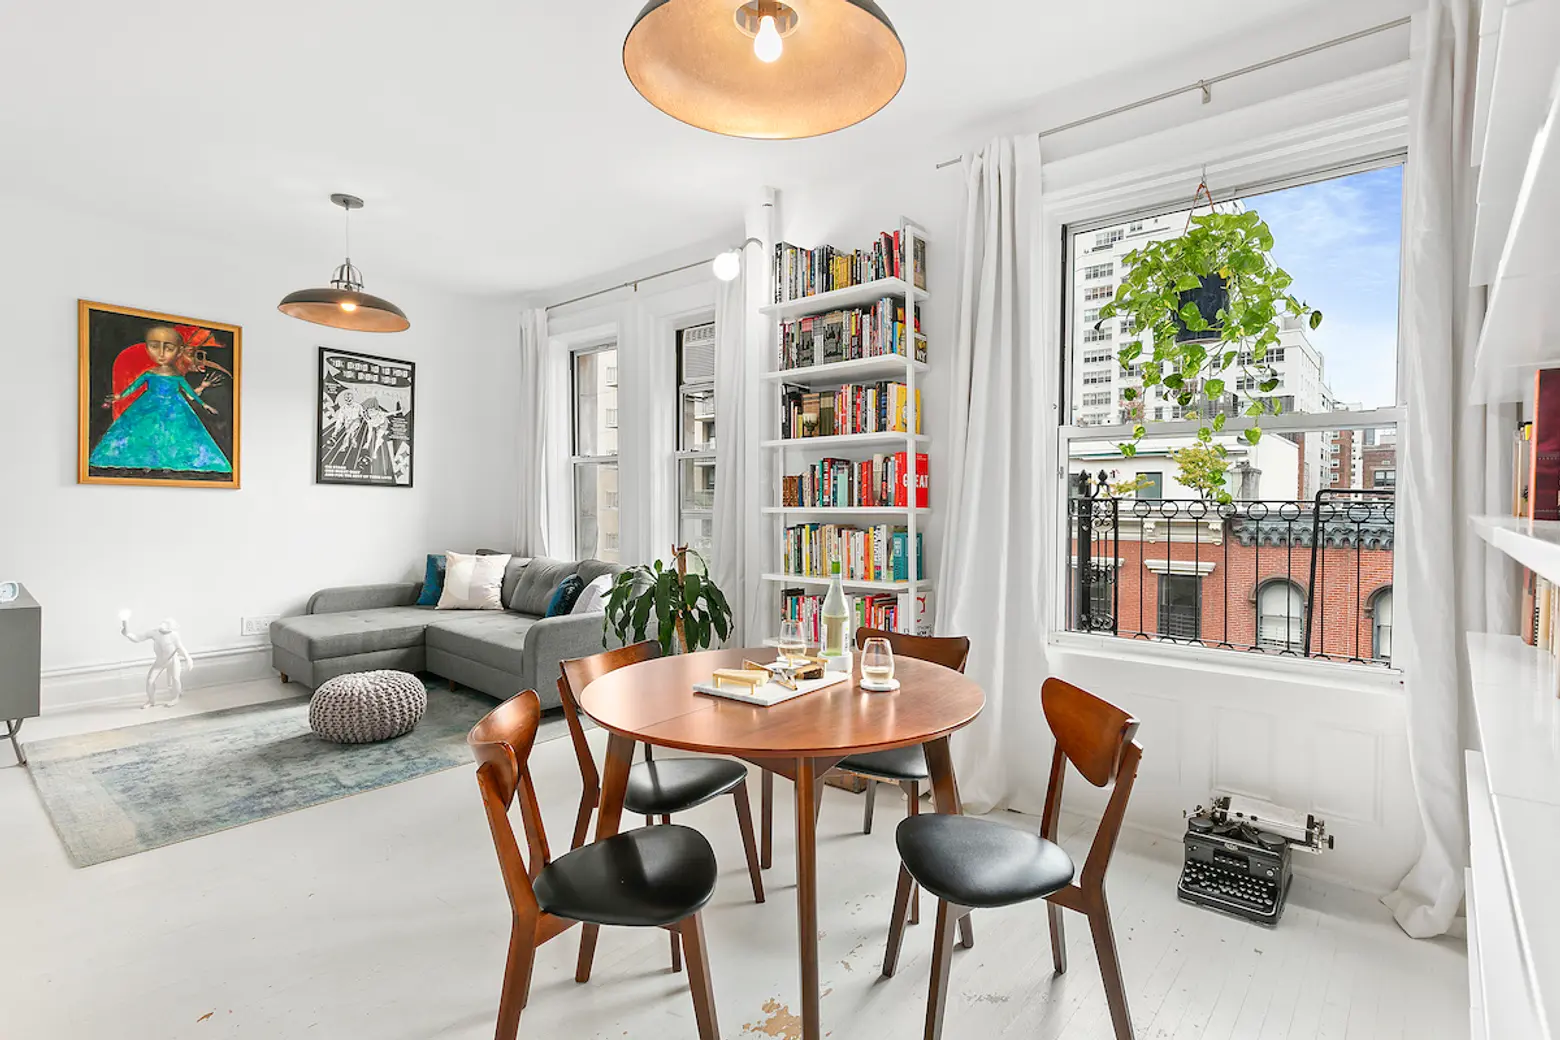 This $849K Gramercy co-op has two bedrooms and plenty of options for more